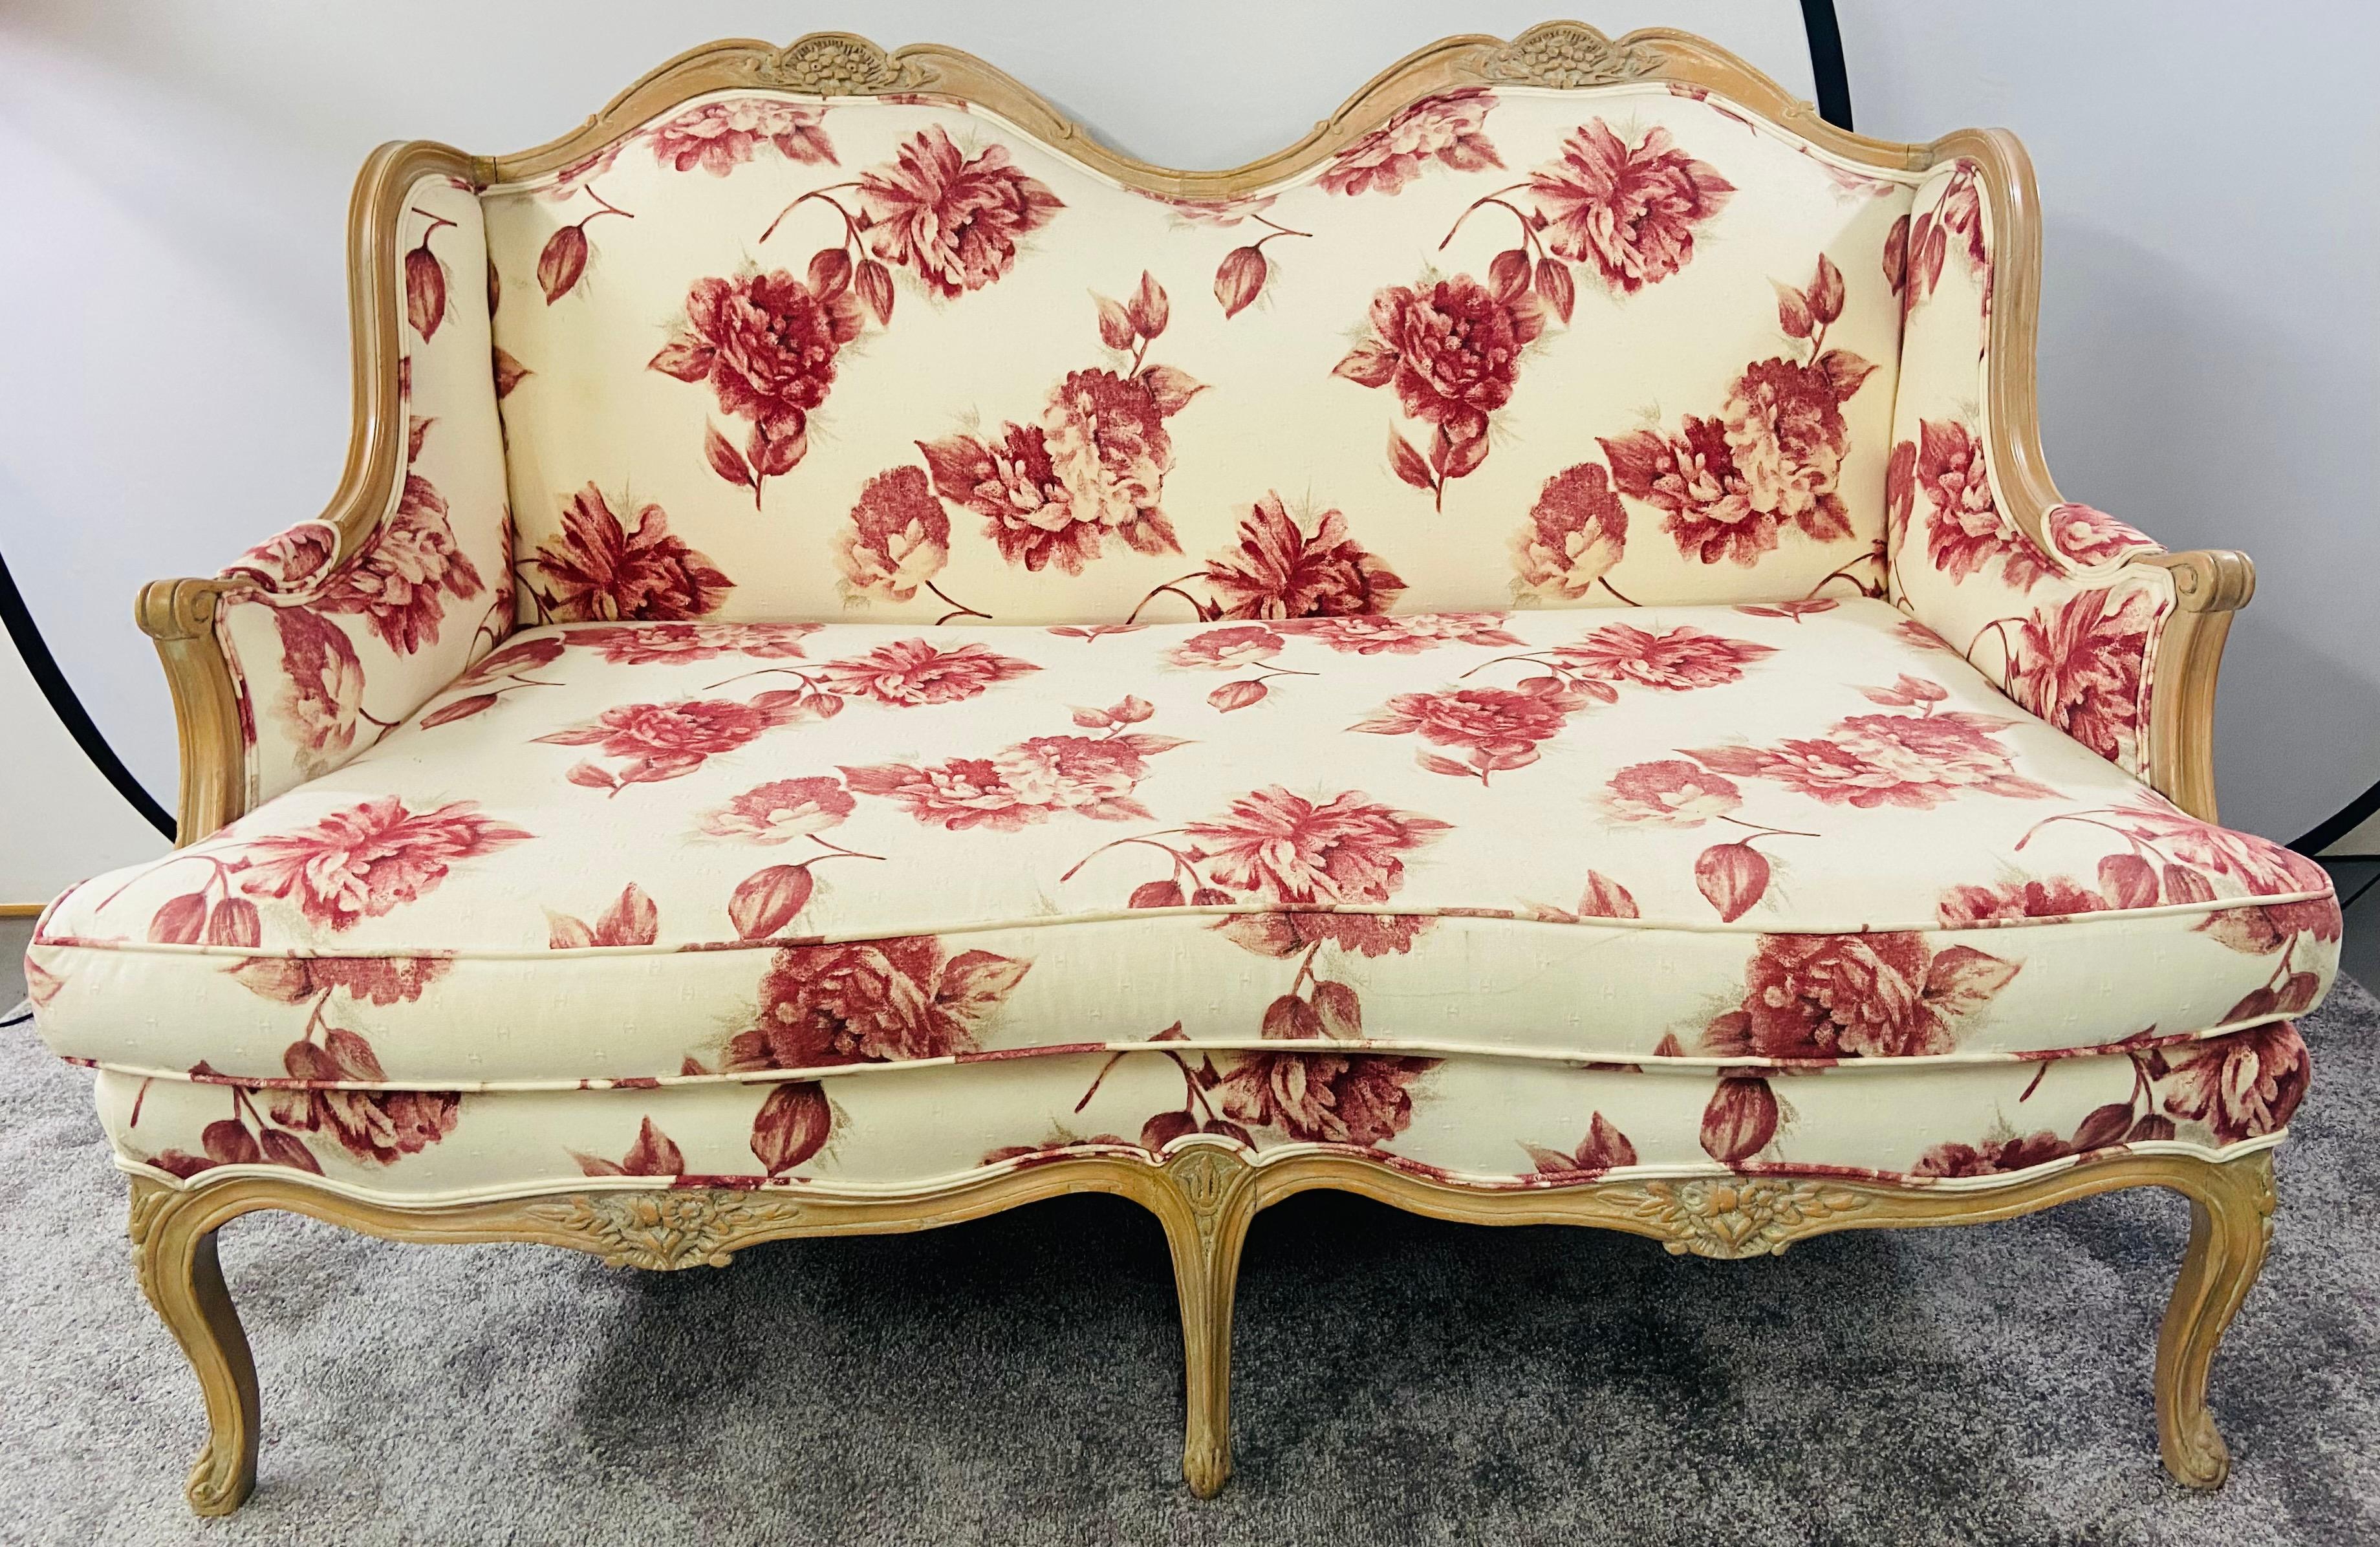 20th Century French Louis XV Style Settee or Canape with Floral Upholstery in Red & White For Sale